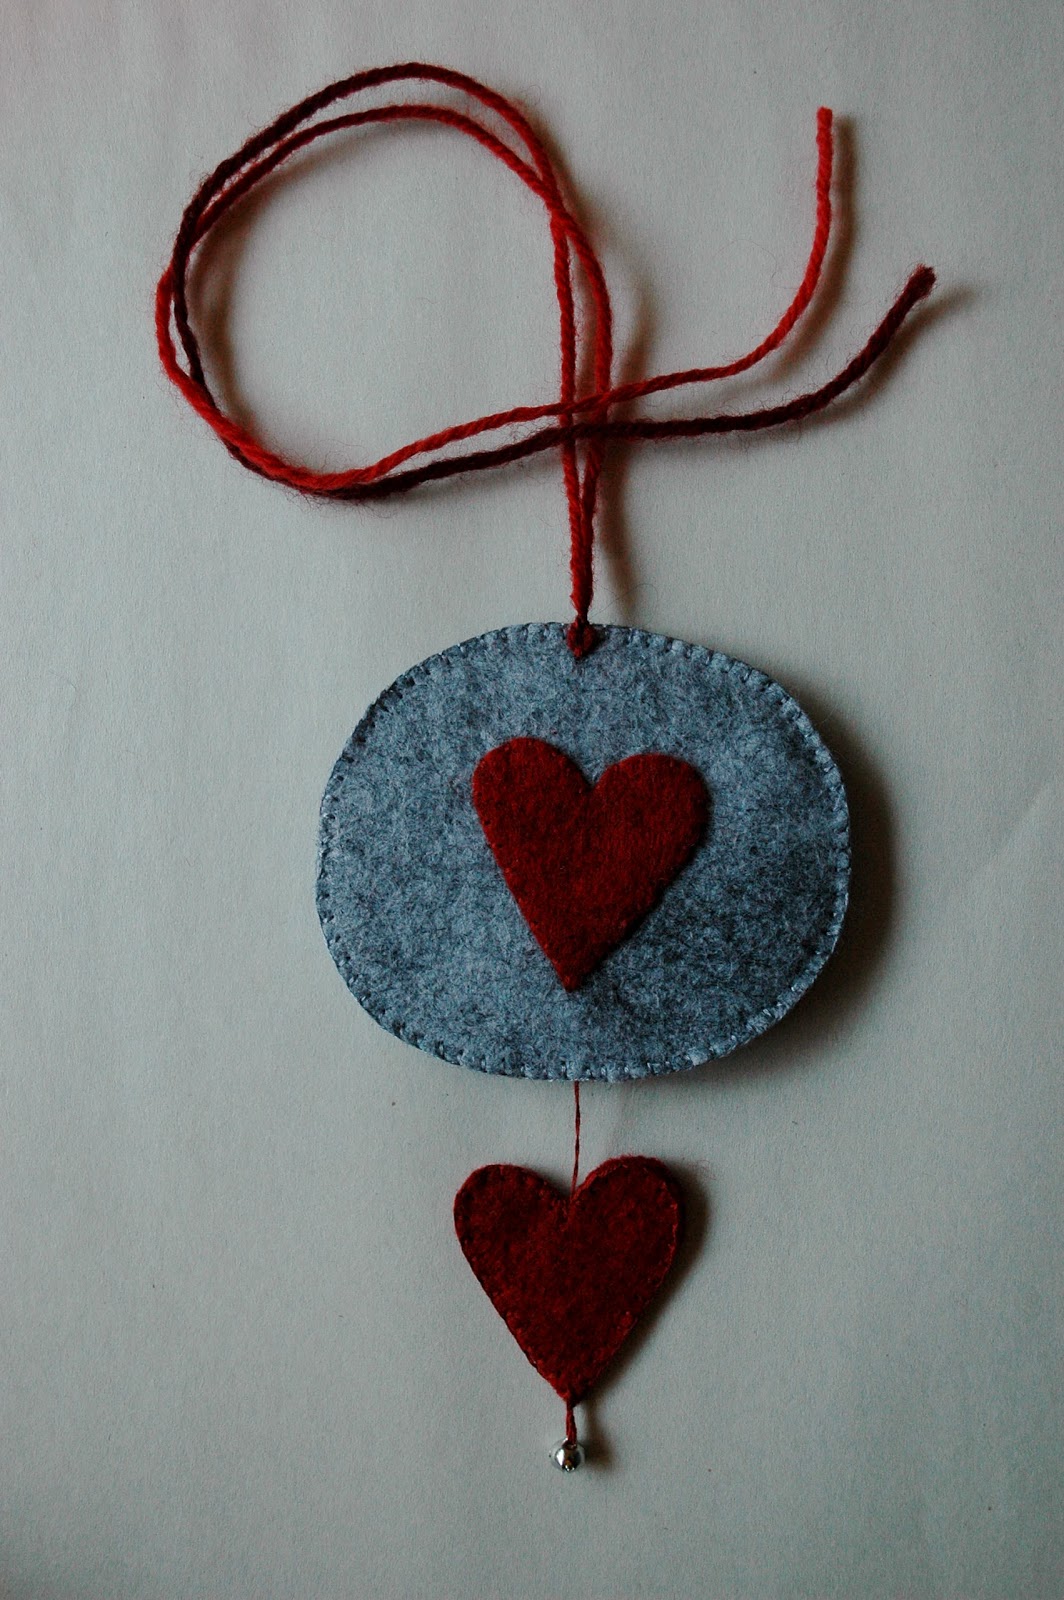 And a little extra love, hidden on the back of the ornament, just for 